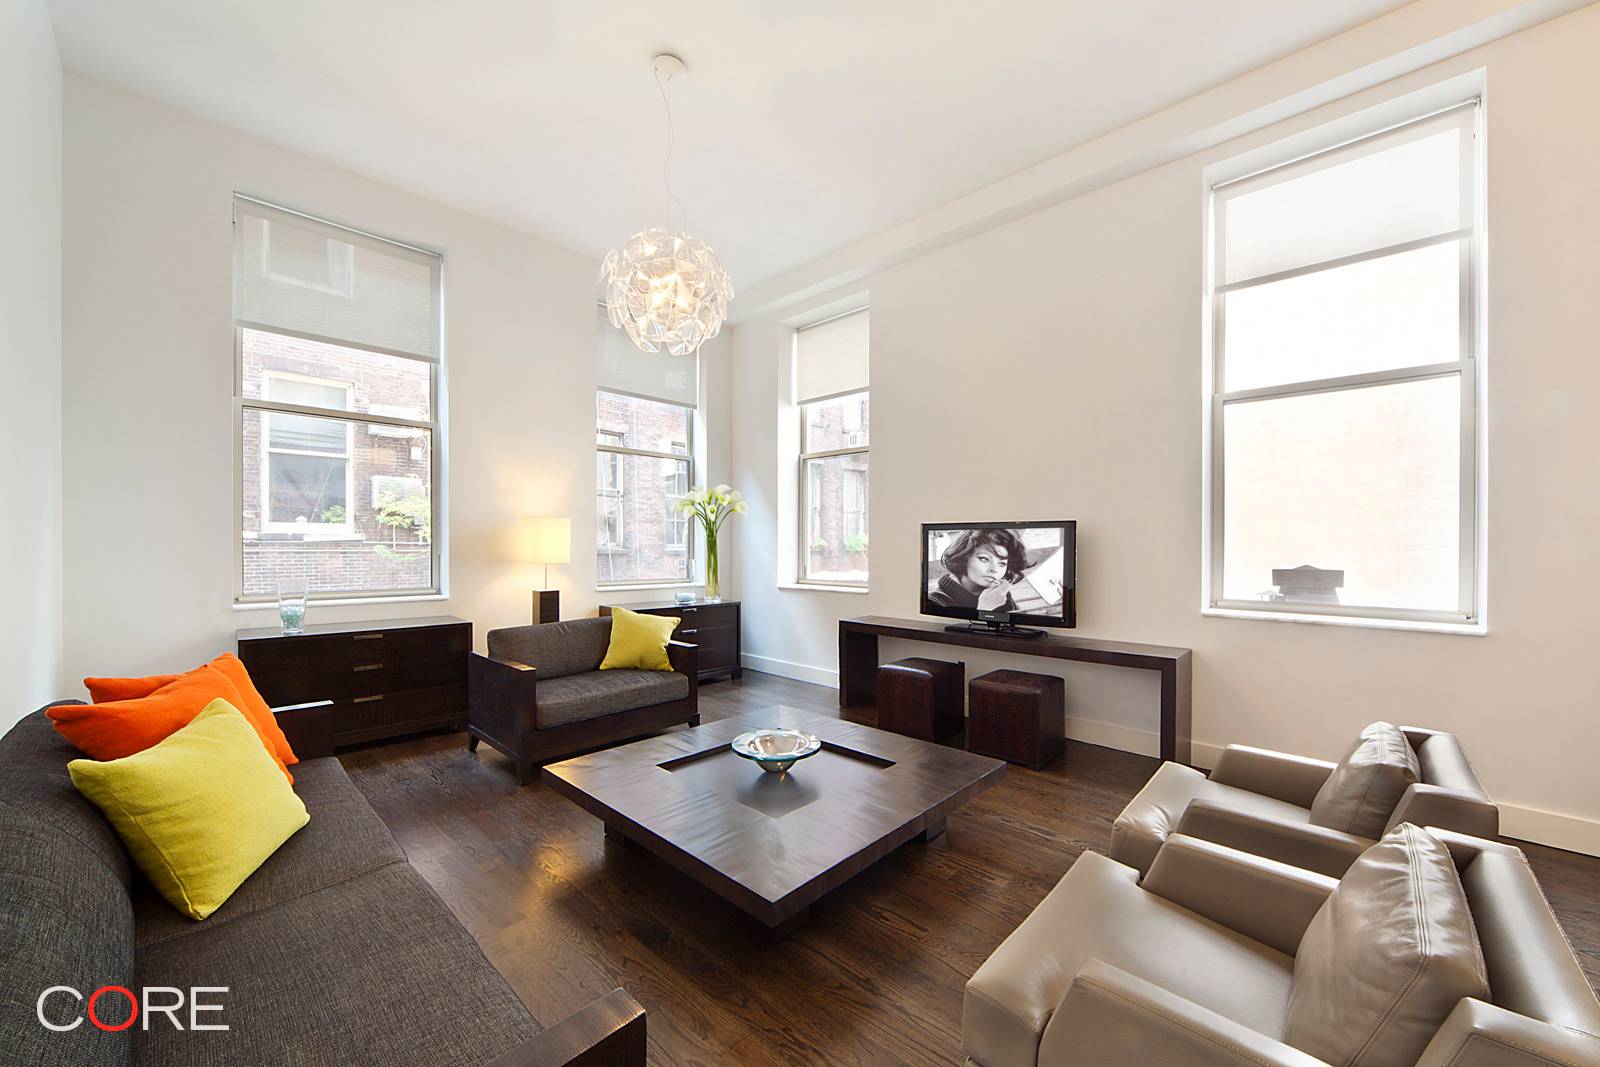 Located in the heart of Tribeca, 83 Franklin is a loft conversion that is unparalleled in its category.